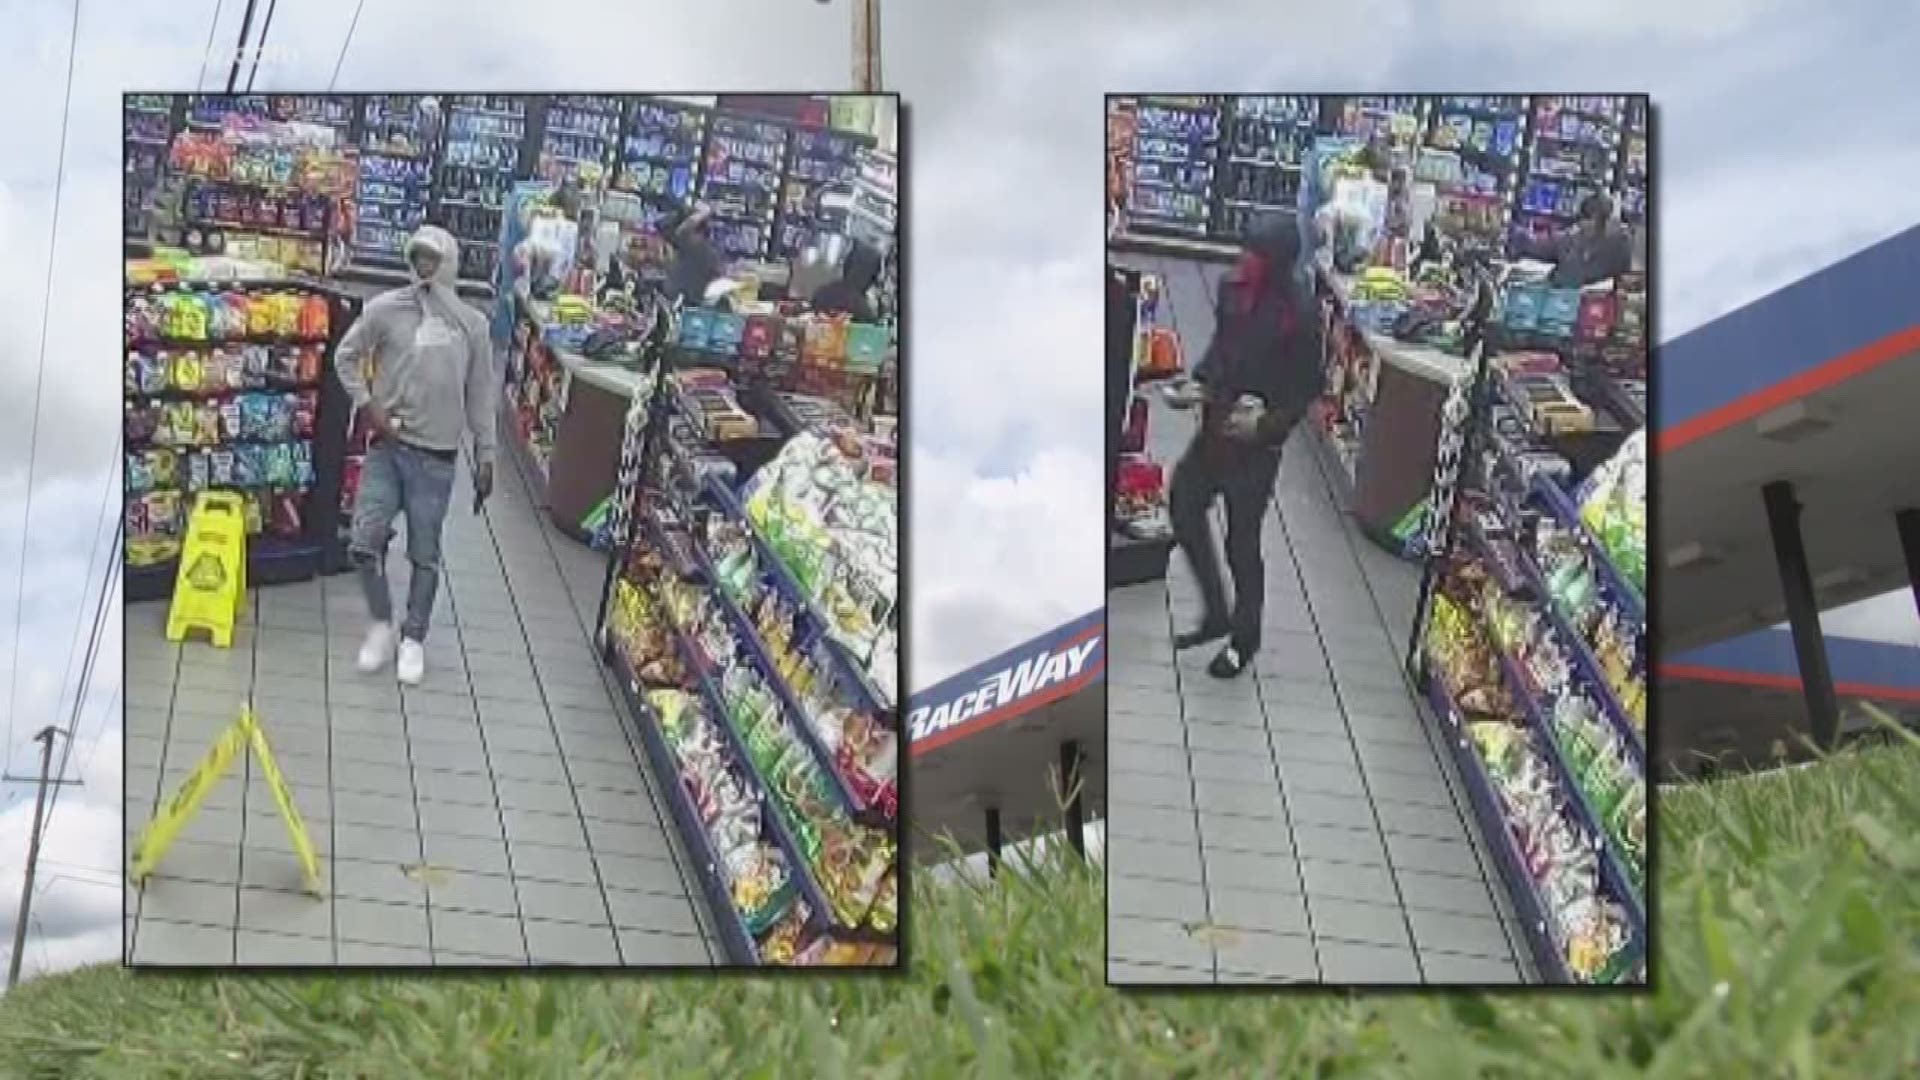 Suffolk police said two men robbed two convenience stores within an hour of each other. Locals were shocked that it happened in an area they consider safe.